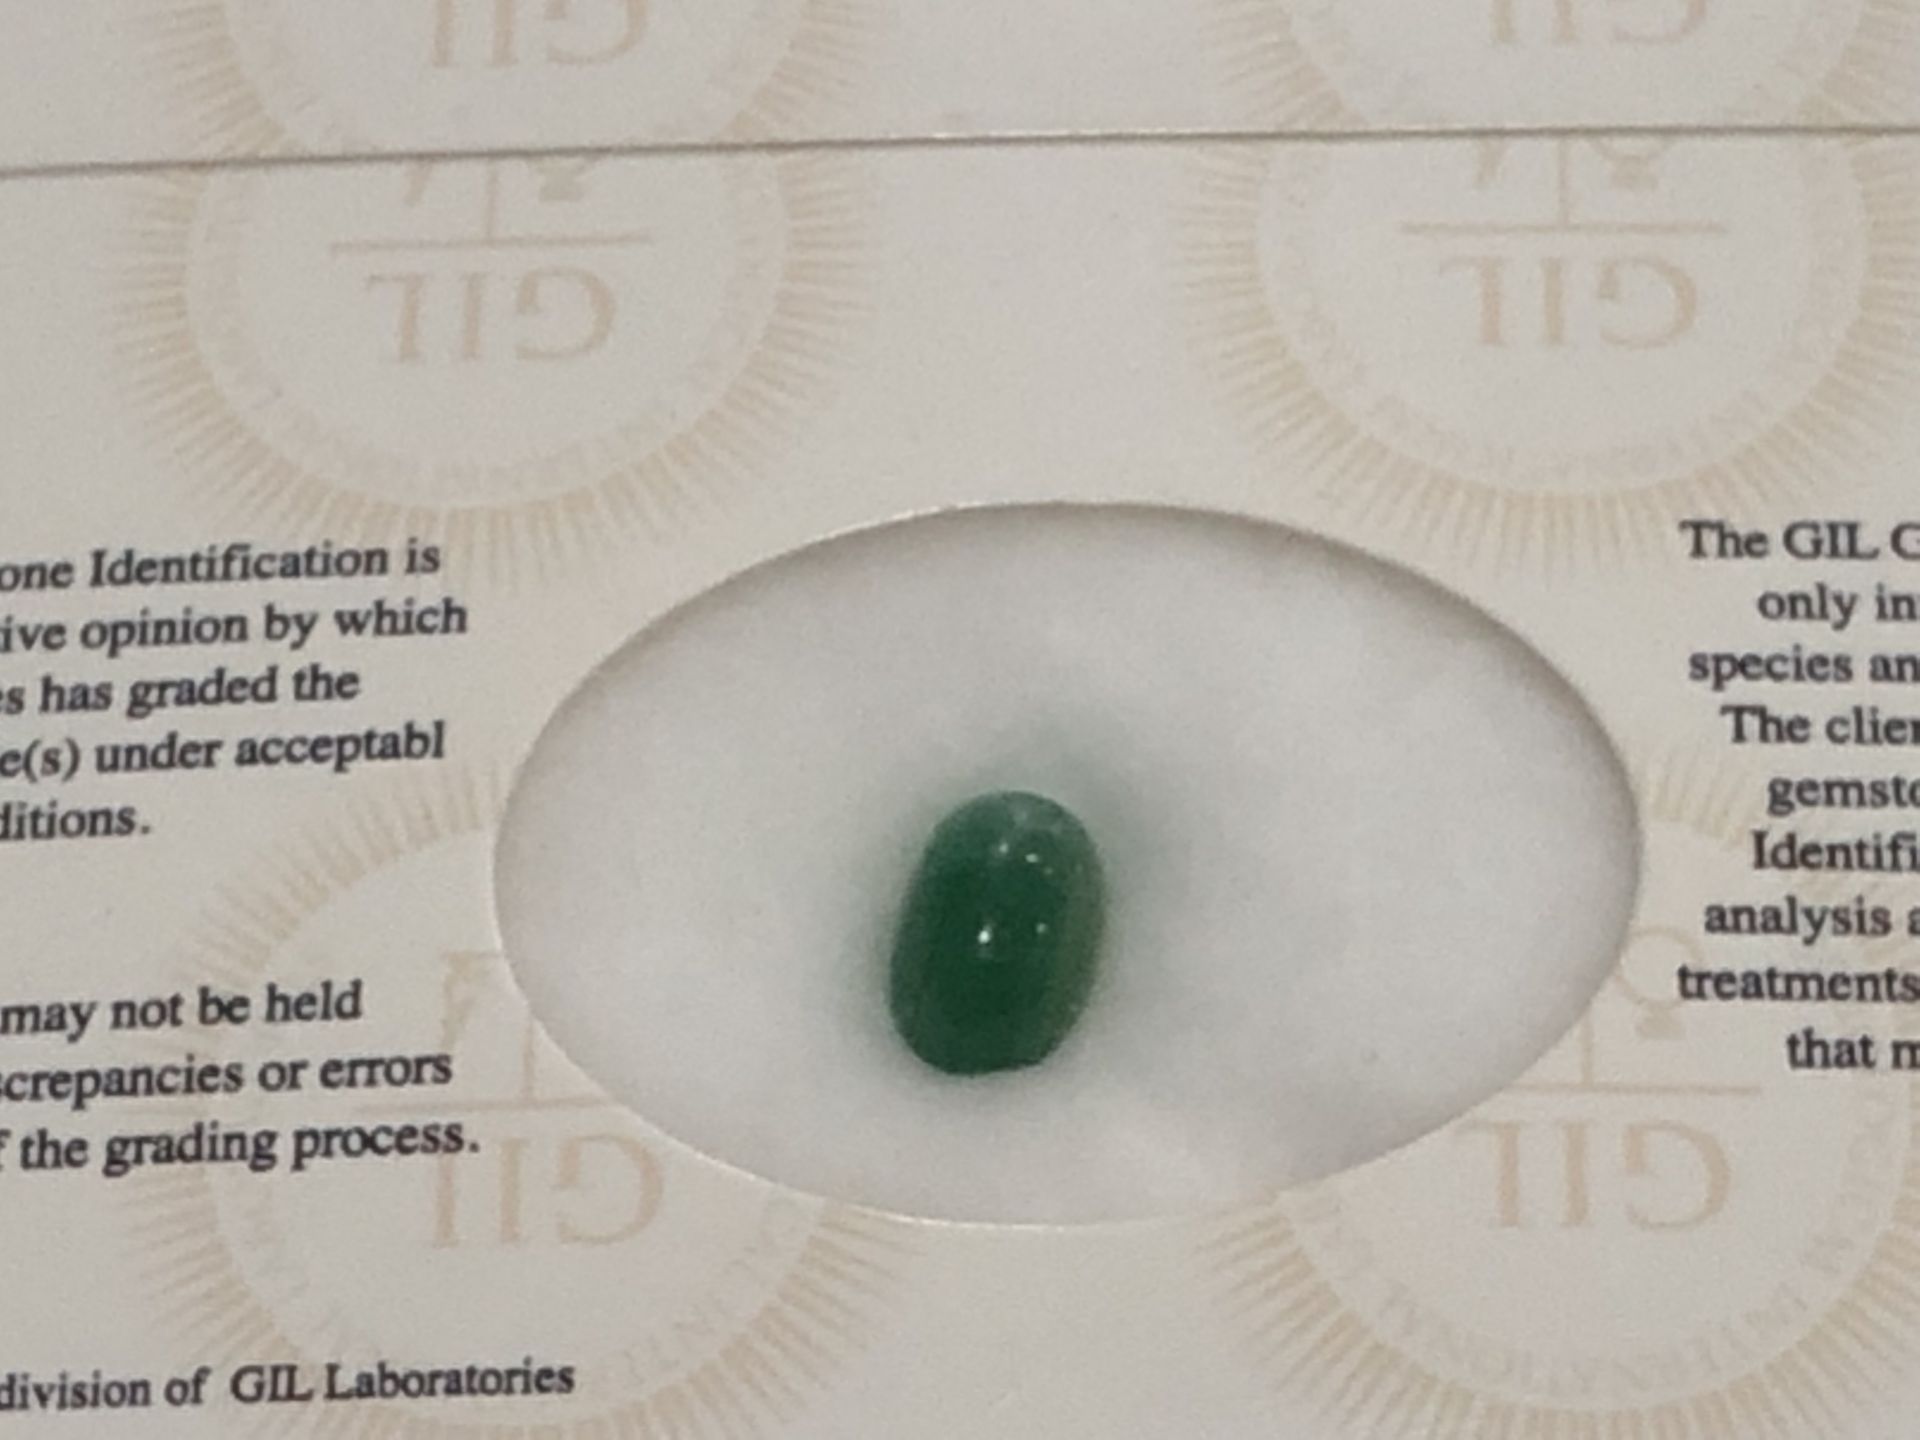 3.82ct Natural Emerald with GIL Certificate - Image 2 of 3